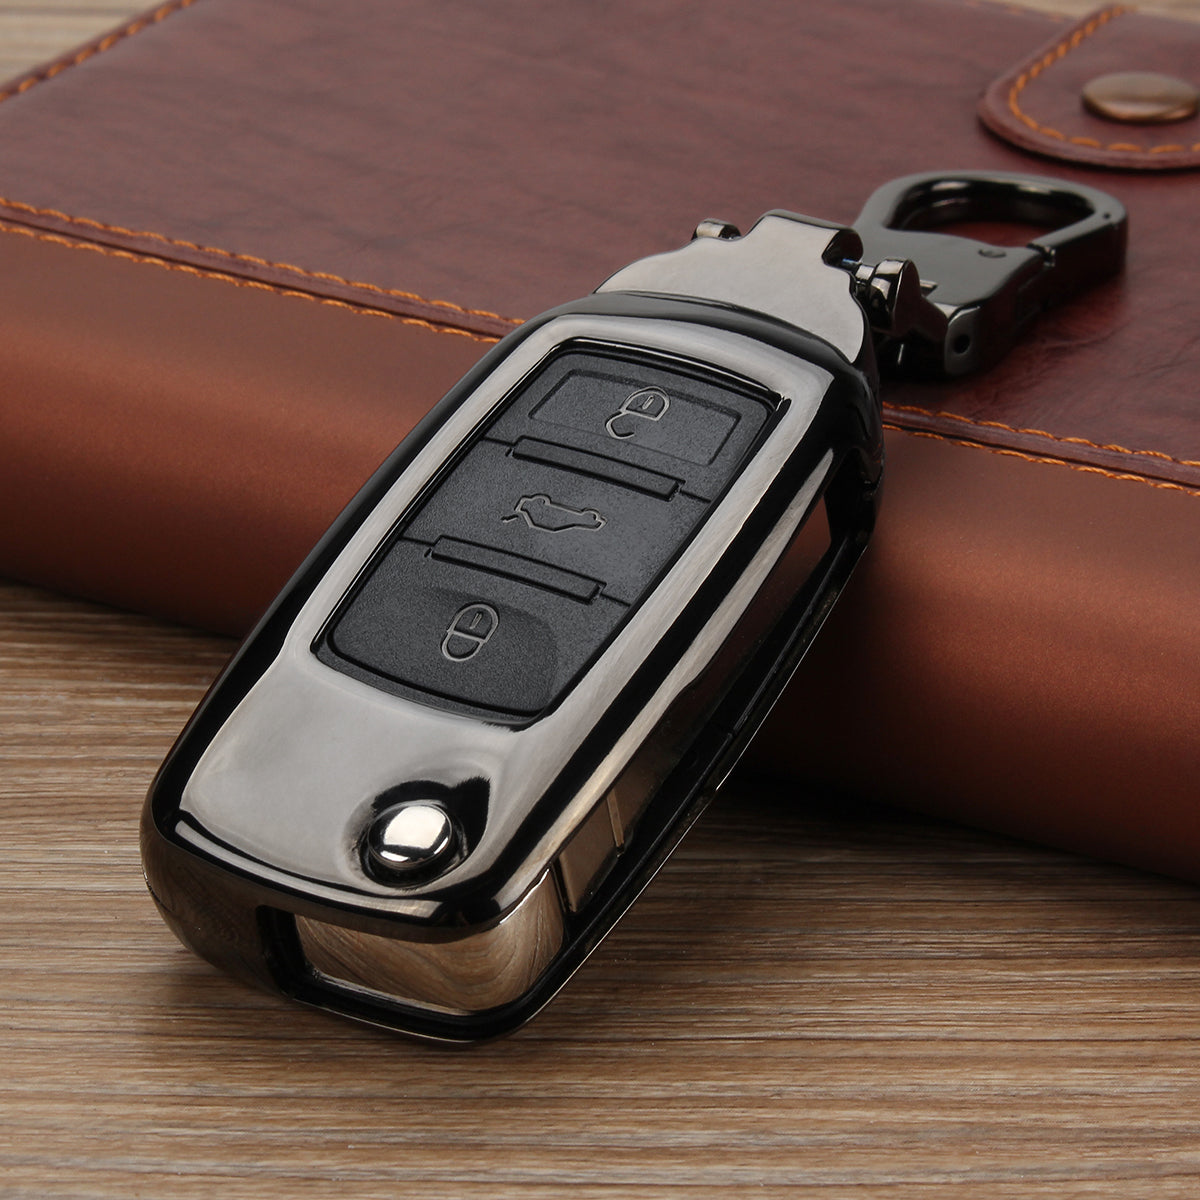 Zinc Alloy Car Key Case/bag Protector Cover Remote Control Fob for VW for Volkswagen GTI Golf Jetta - Auto GoShop